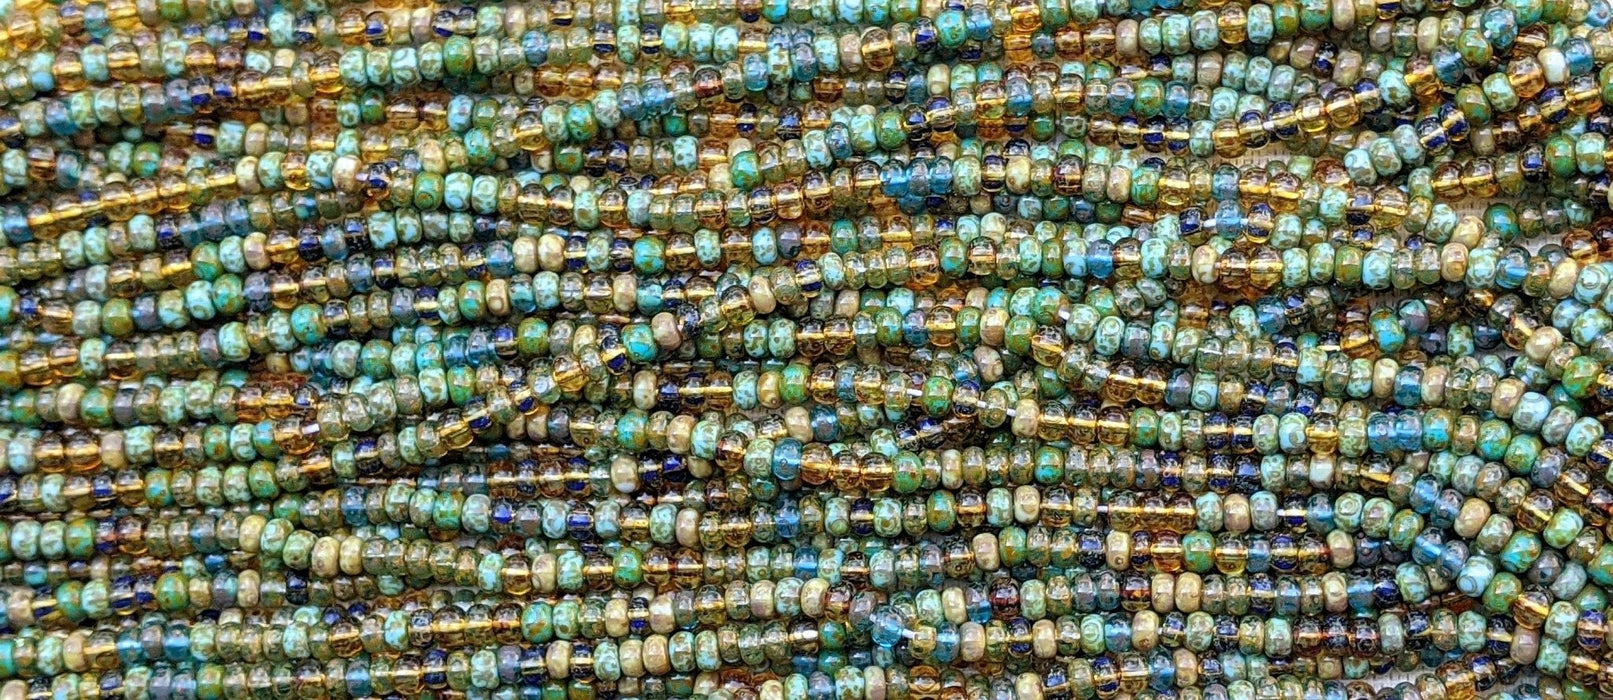 Gold & Turquoise Picasso Stripe Mix - Size 5/0 Czech Glass Seed Beads - 20 Inch Strand (BW80) - Beads and Babble